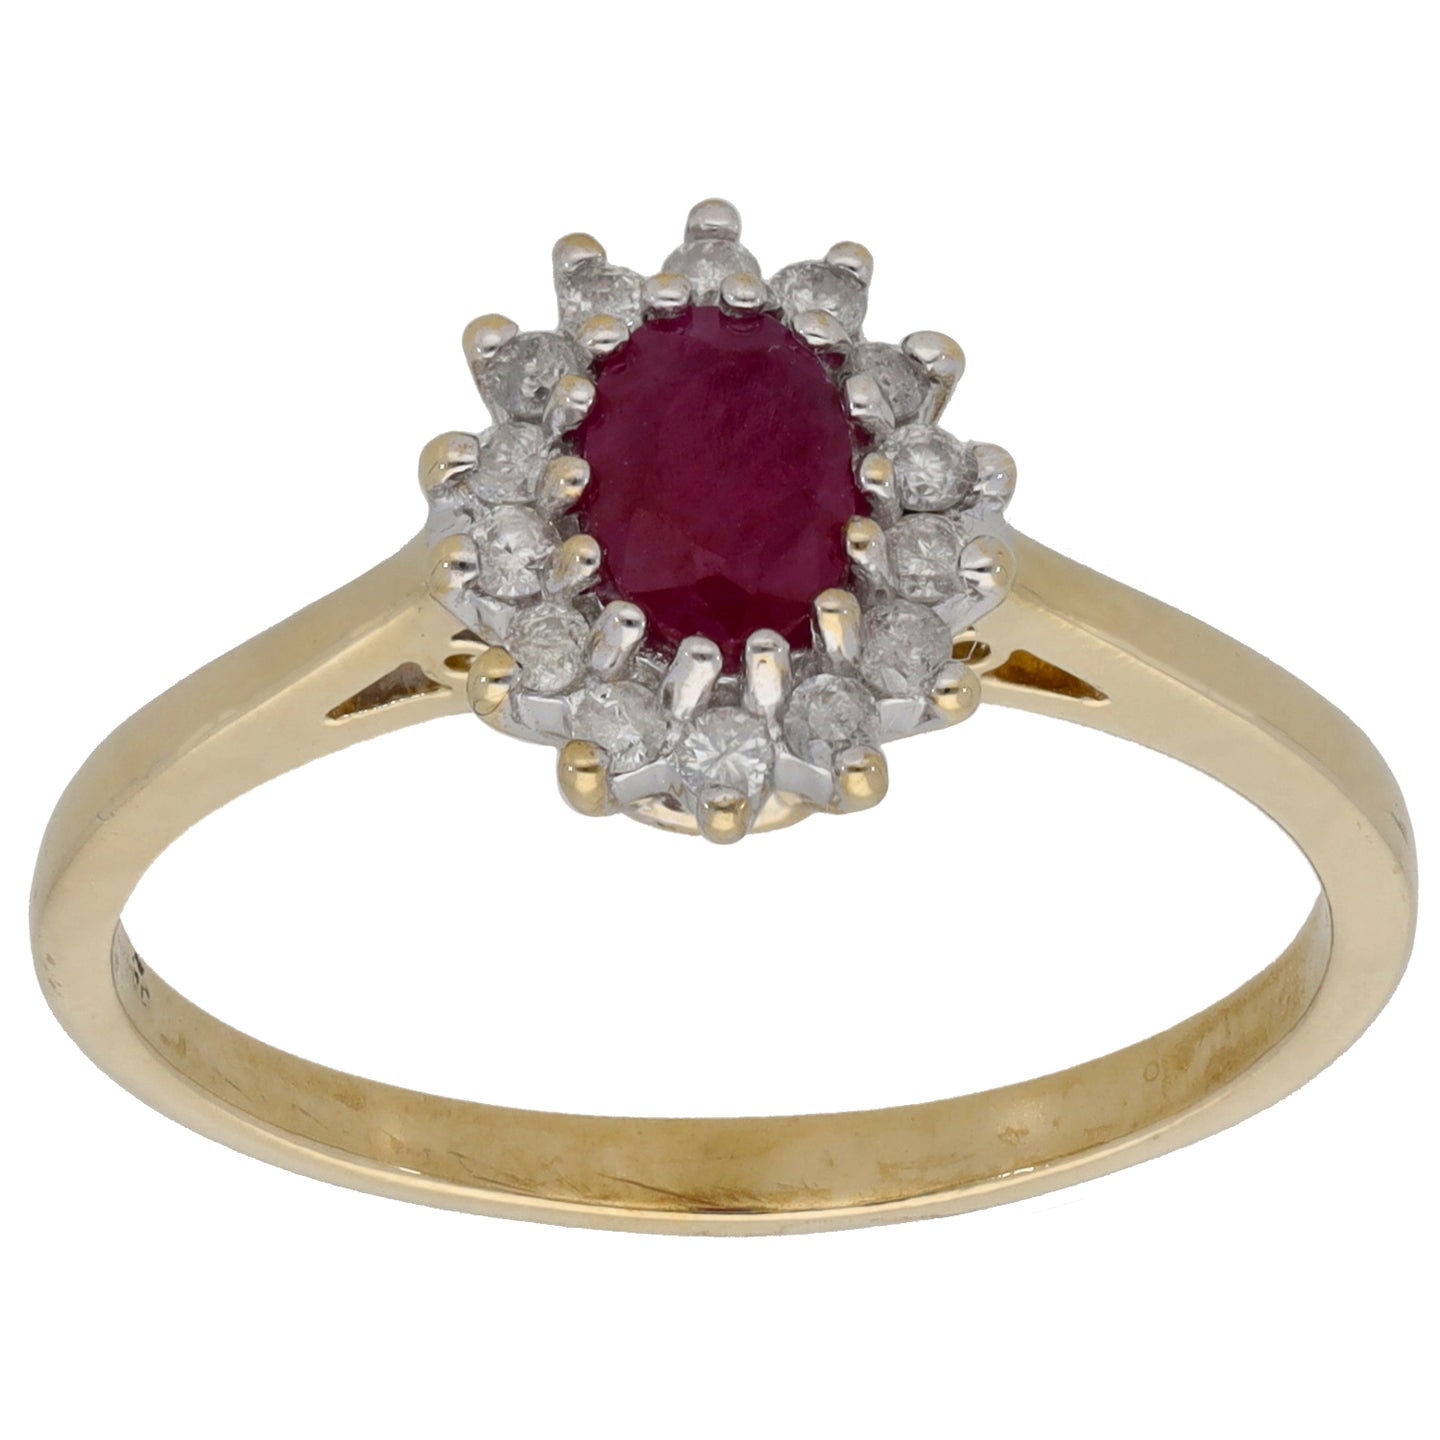 9ct Gold 0.14ct Diamond & Glass Filled Ruby Cluster Ring Size R